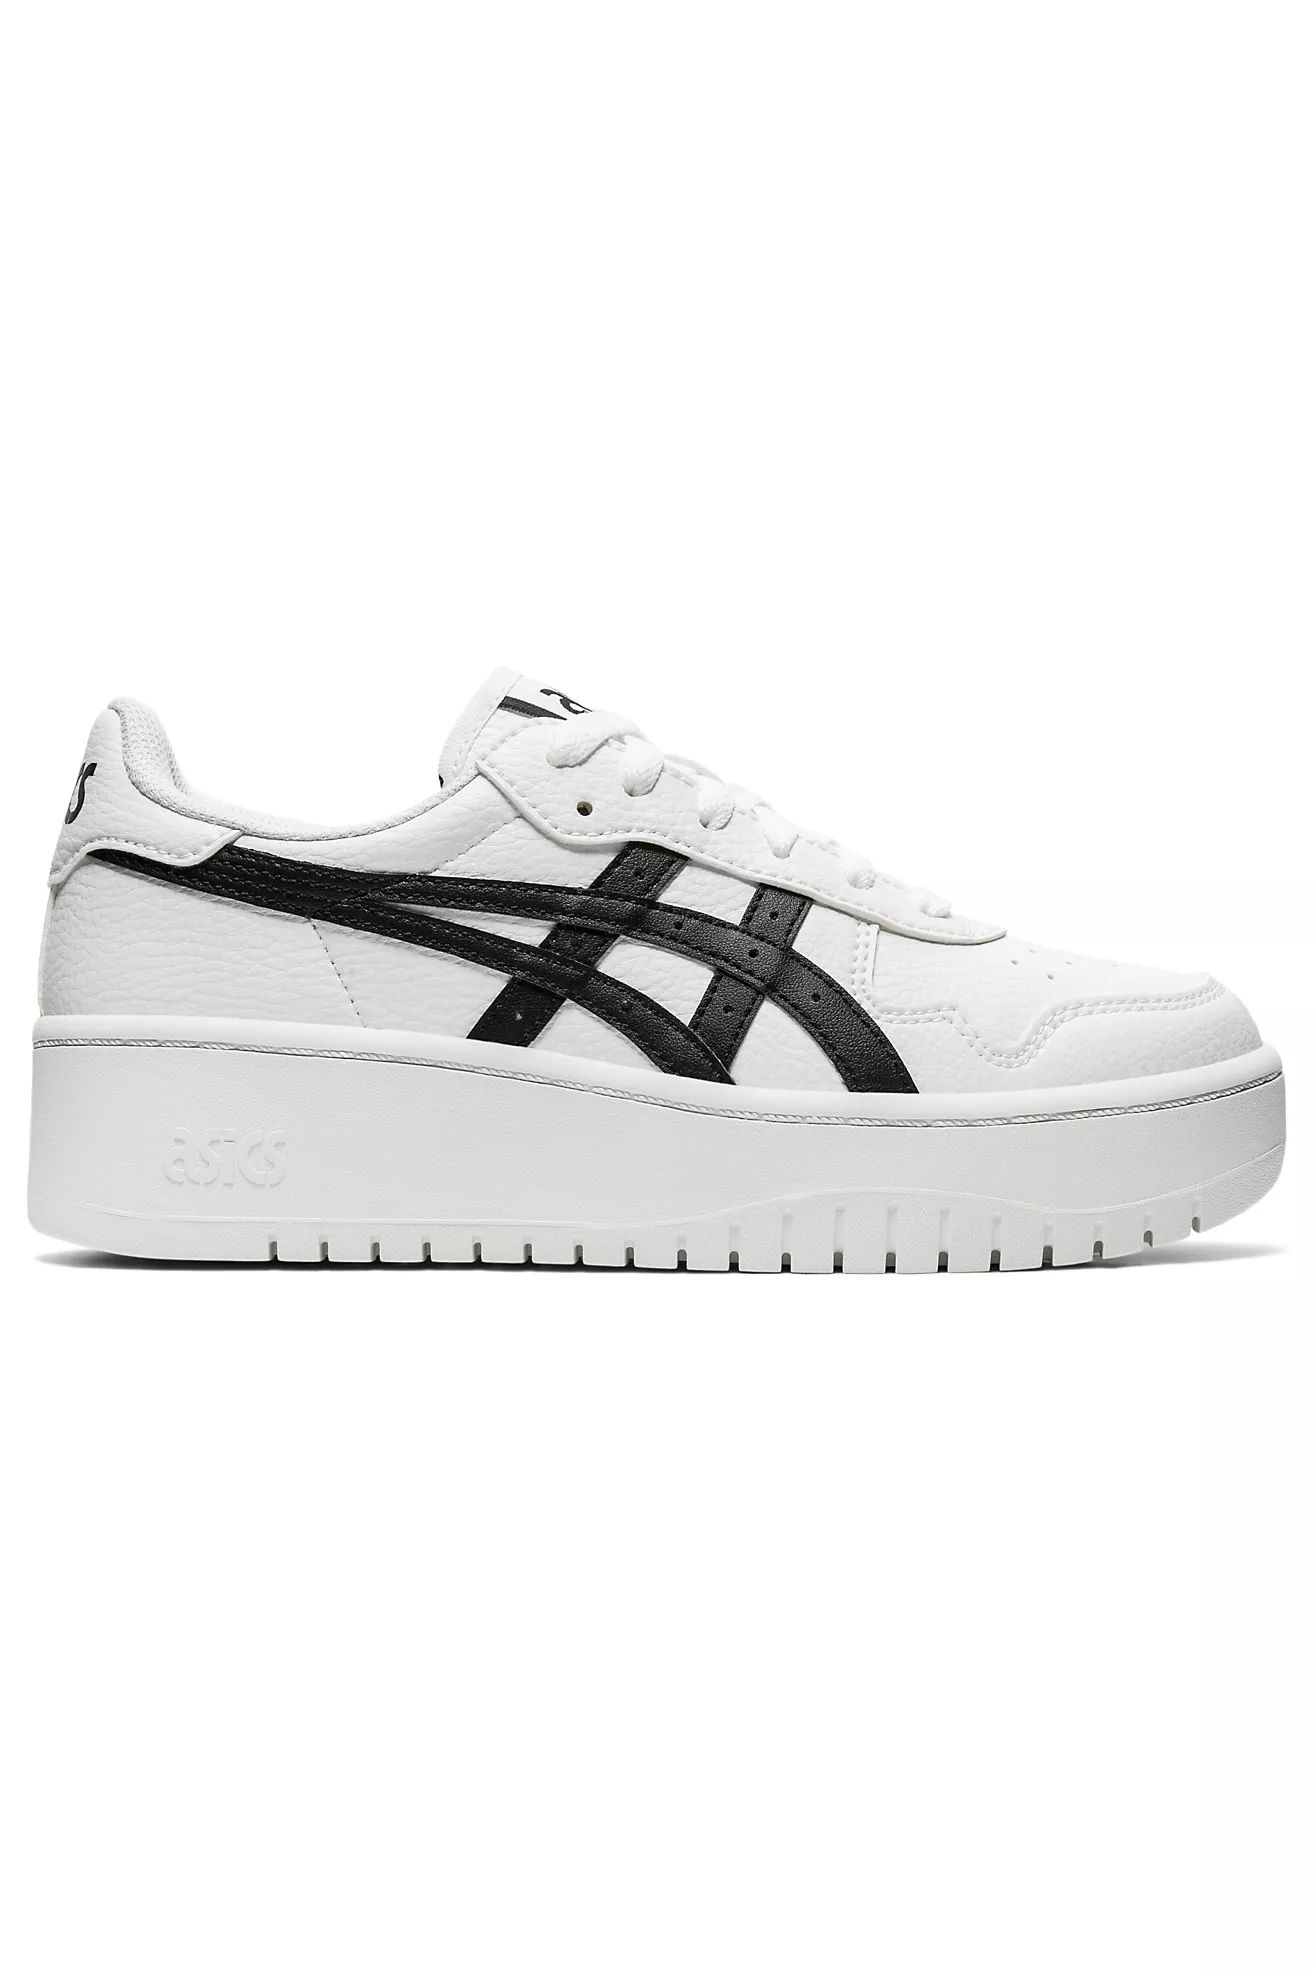 ASICS Japan S PF Sportstyle Sneakers | Anthropologie (US)